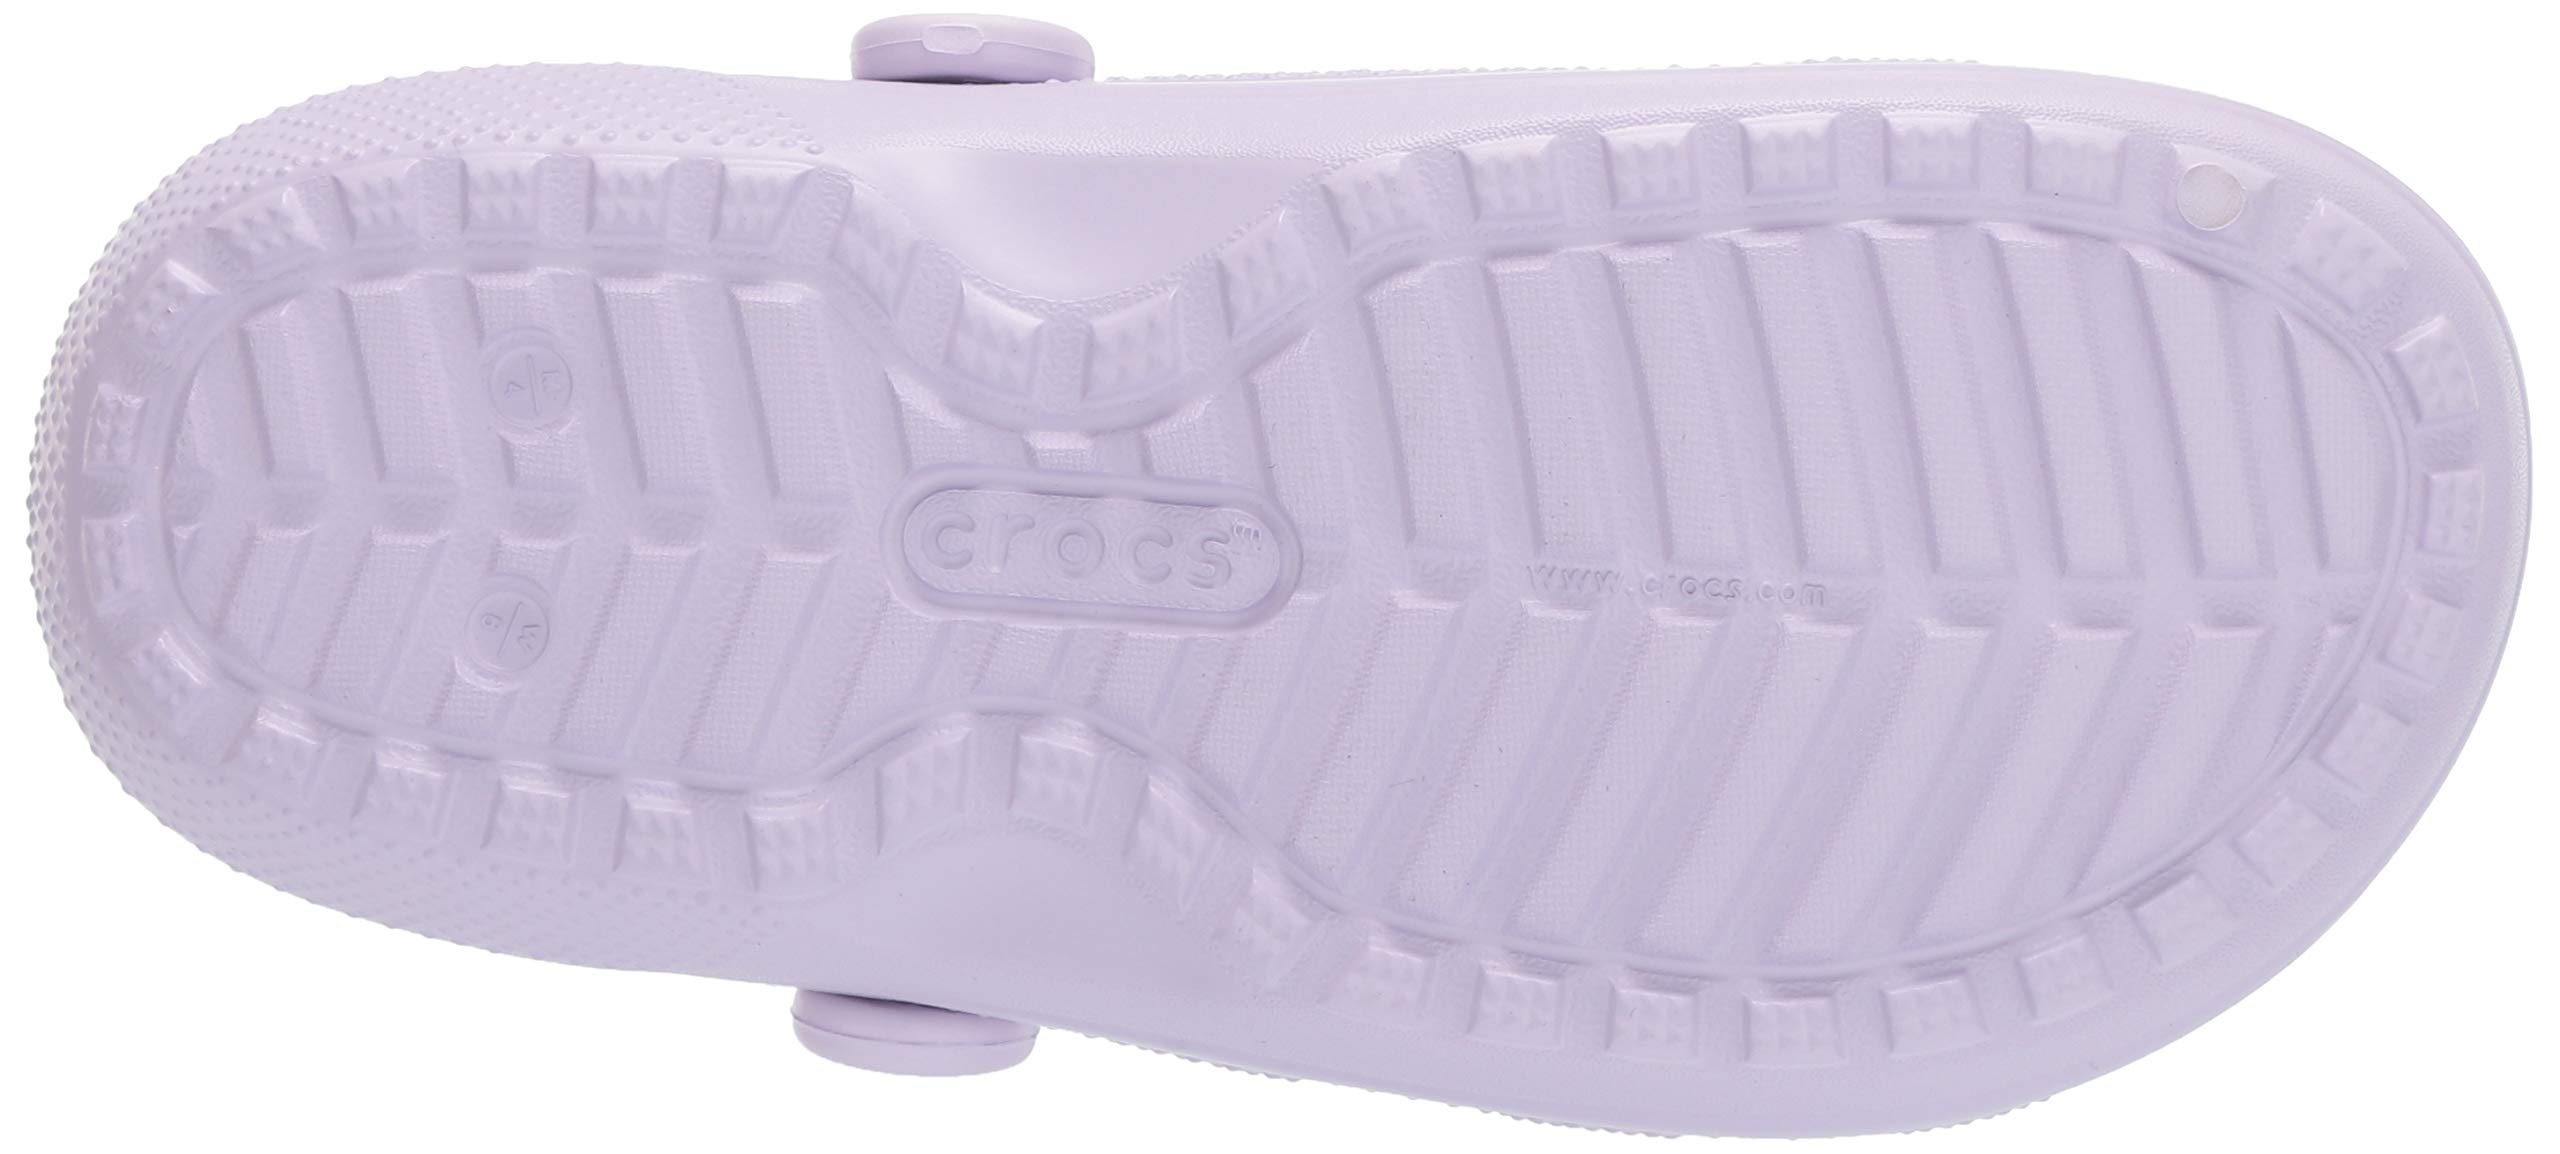 Crocs Unisex-Adult Classic Lined Clog | Fuzzy Slippers